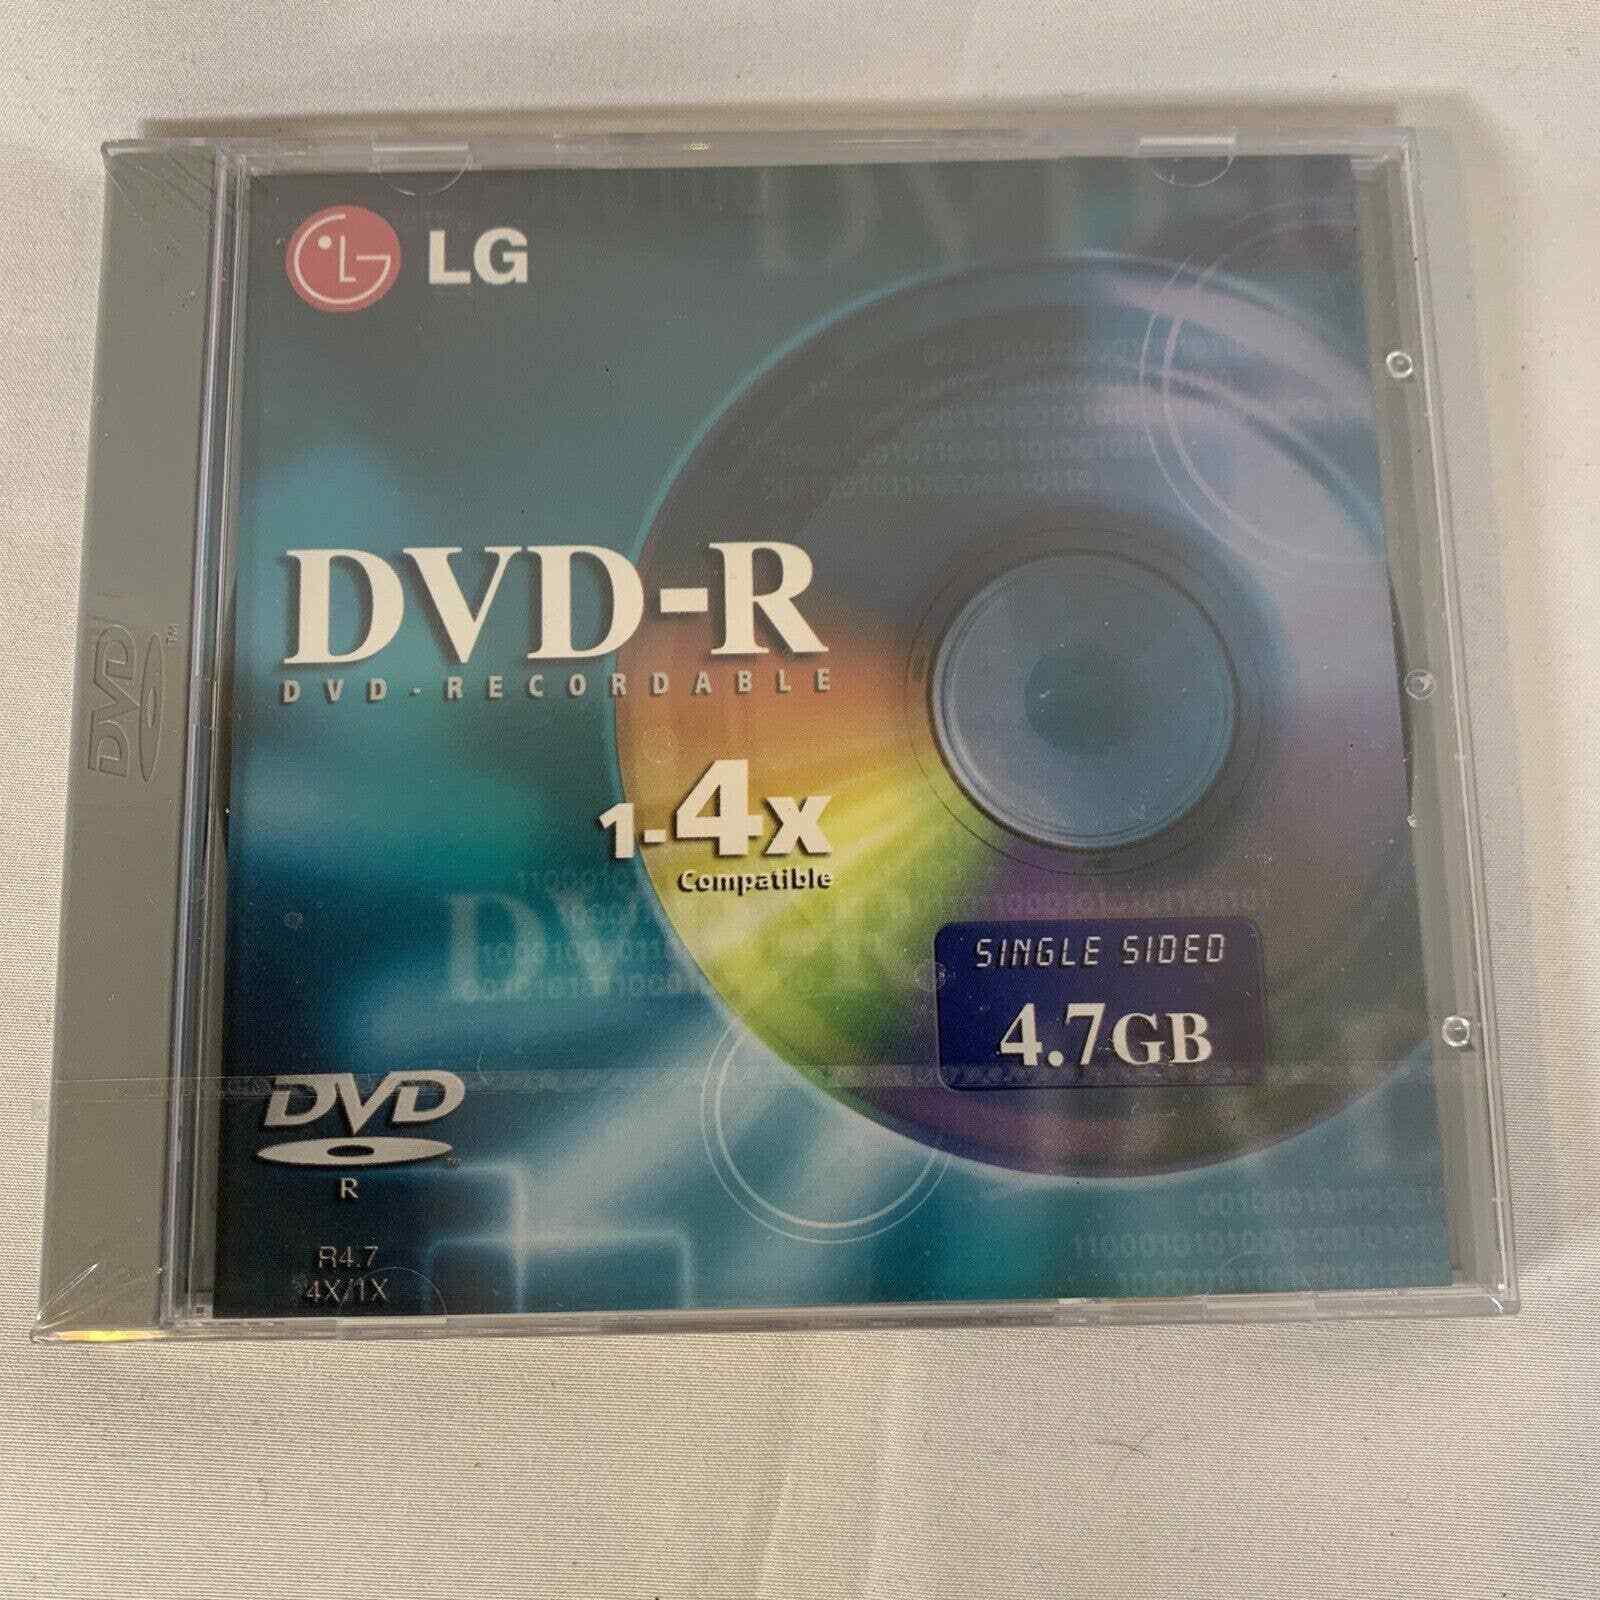 LG Electronics DVD-R 4.7 GB 120 MIN VIDEO 1-4X Compatible - New Sealed